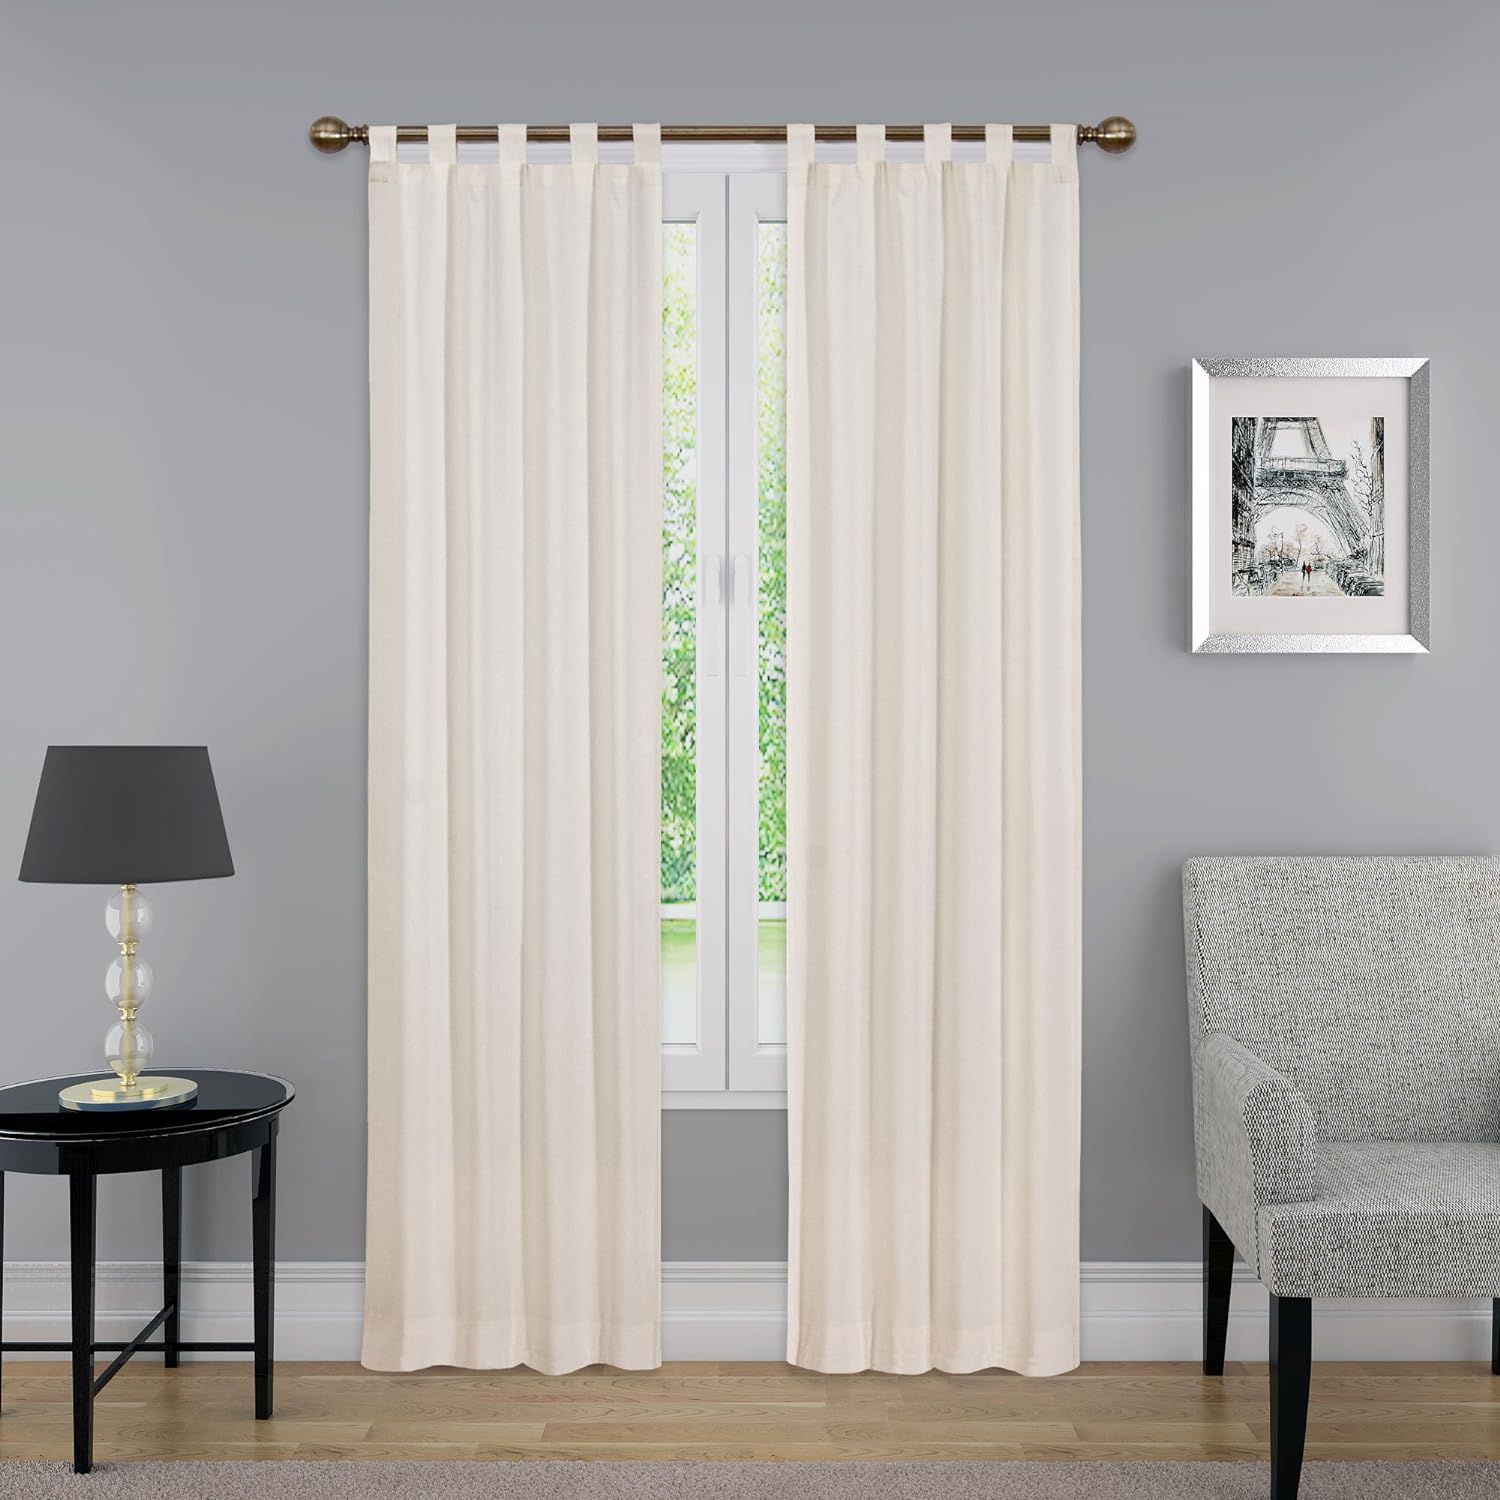 PAIRS TO GO Montana Modern Decorative Tab Top Window Curtains for Bedroom or Living Room (2 Panel... | Amazon (US)